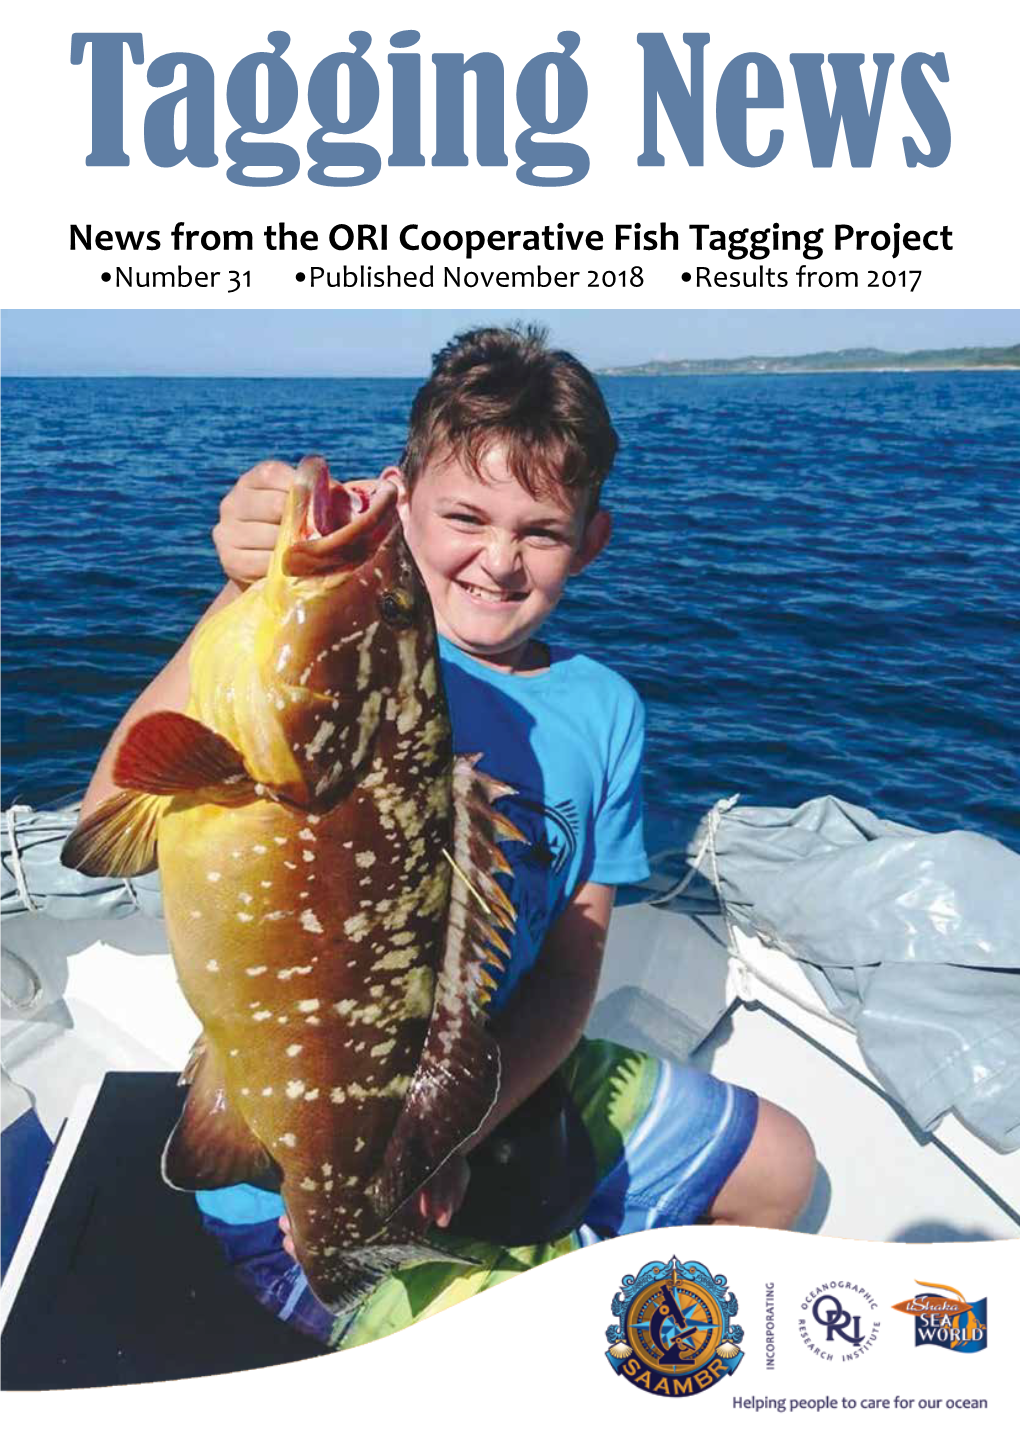 News from the ORI Cooperative Fish Tagging Project •Number 31 •Published November 2018 •Results from 2017 from the Tagging Officer